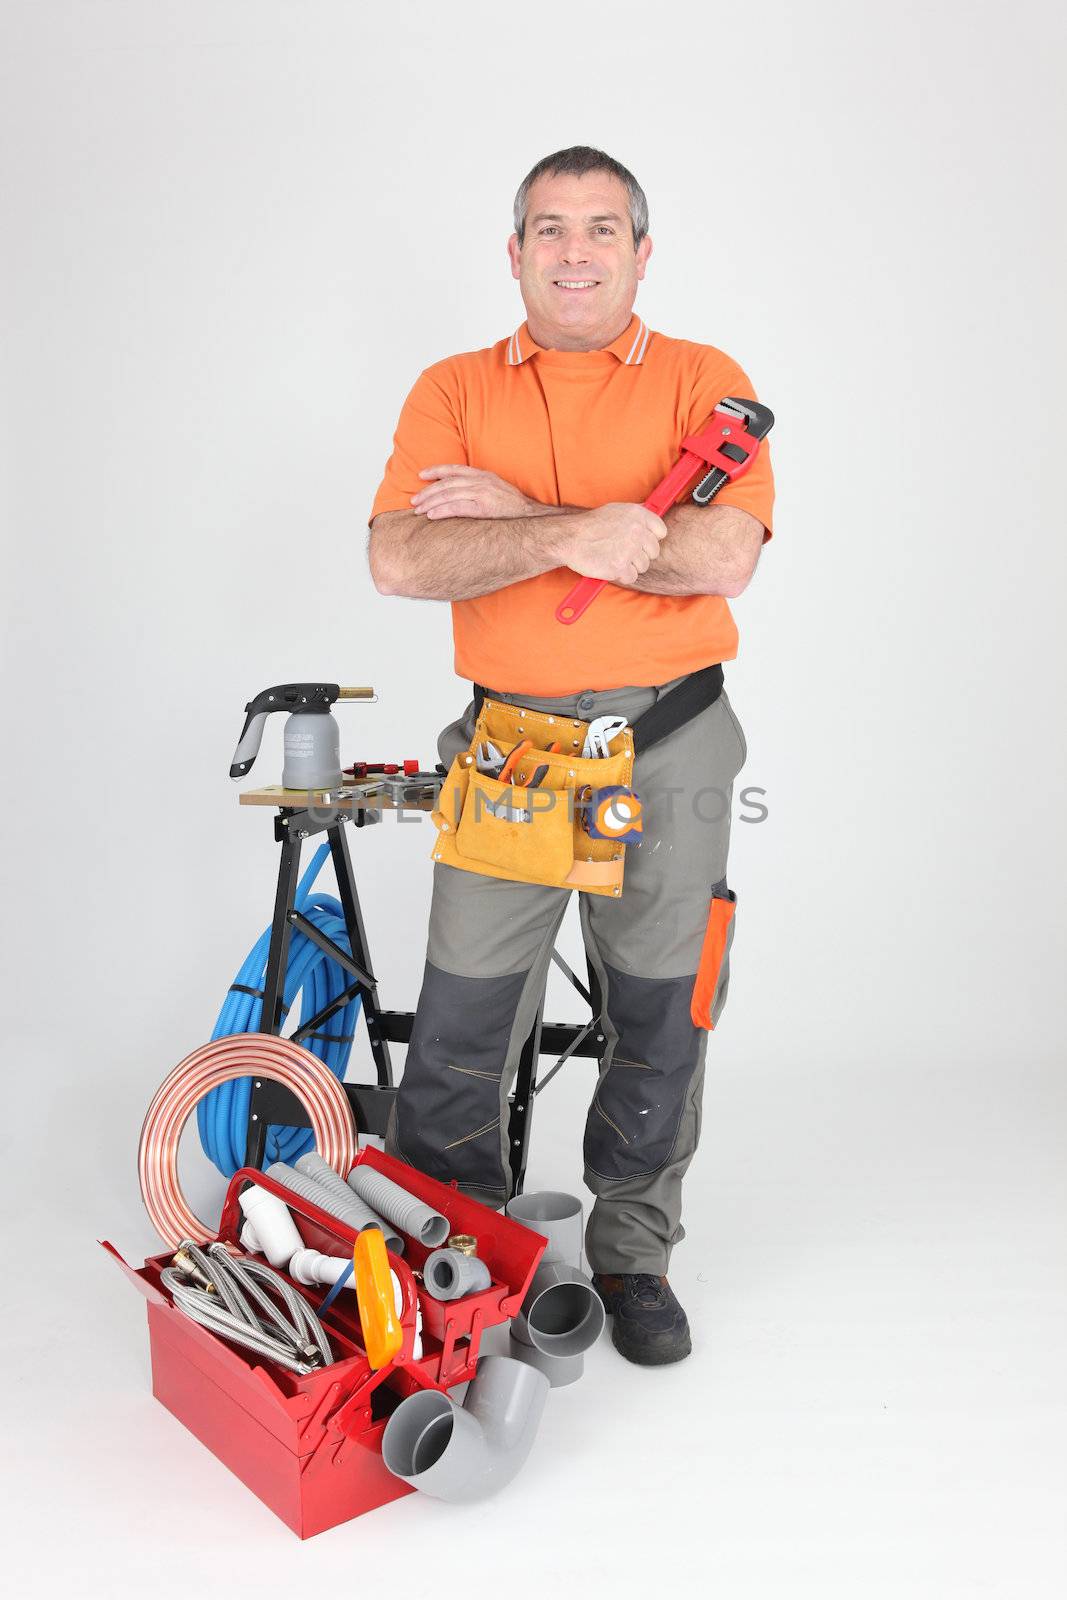 Studio shot of a plumber with tools of the trade